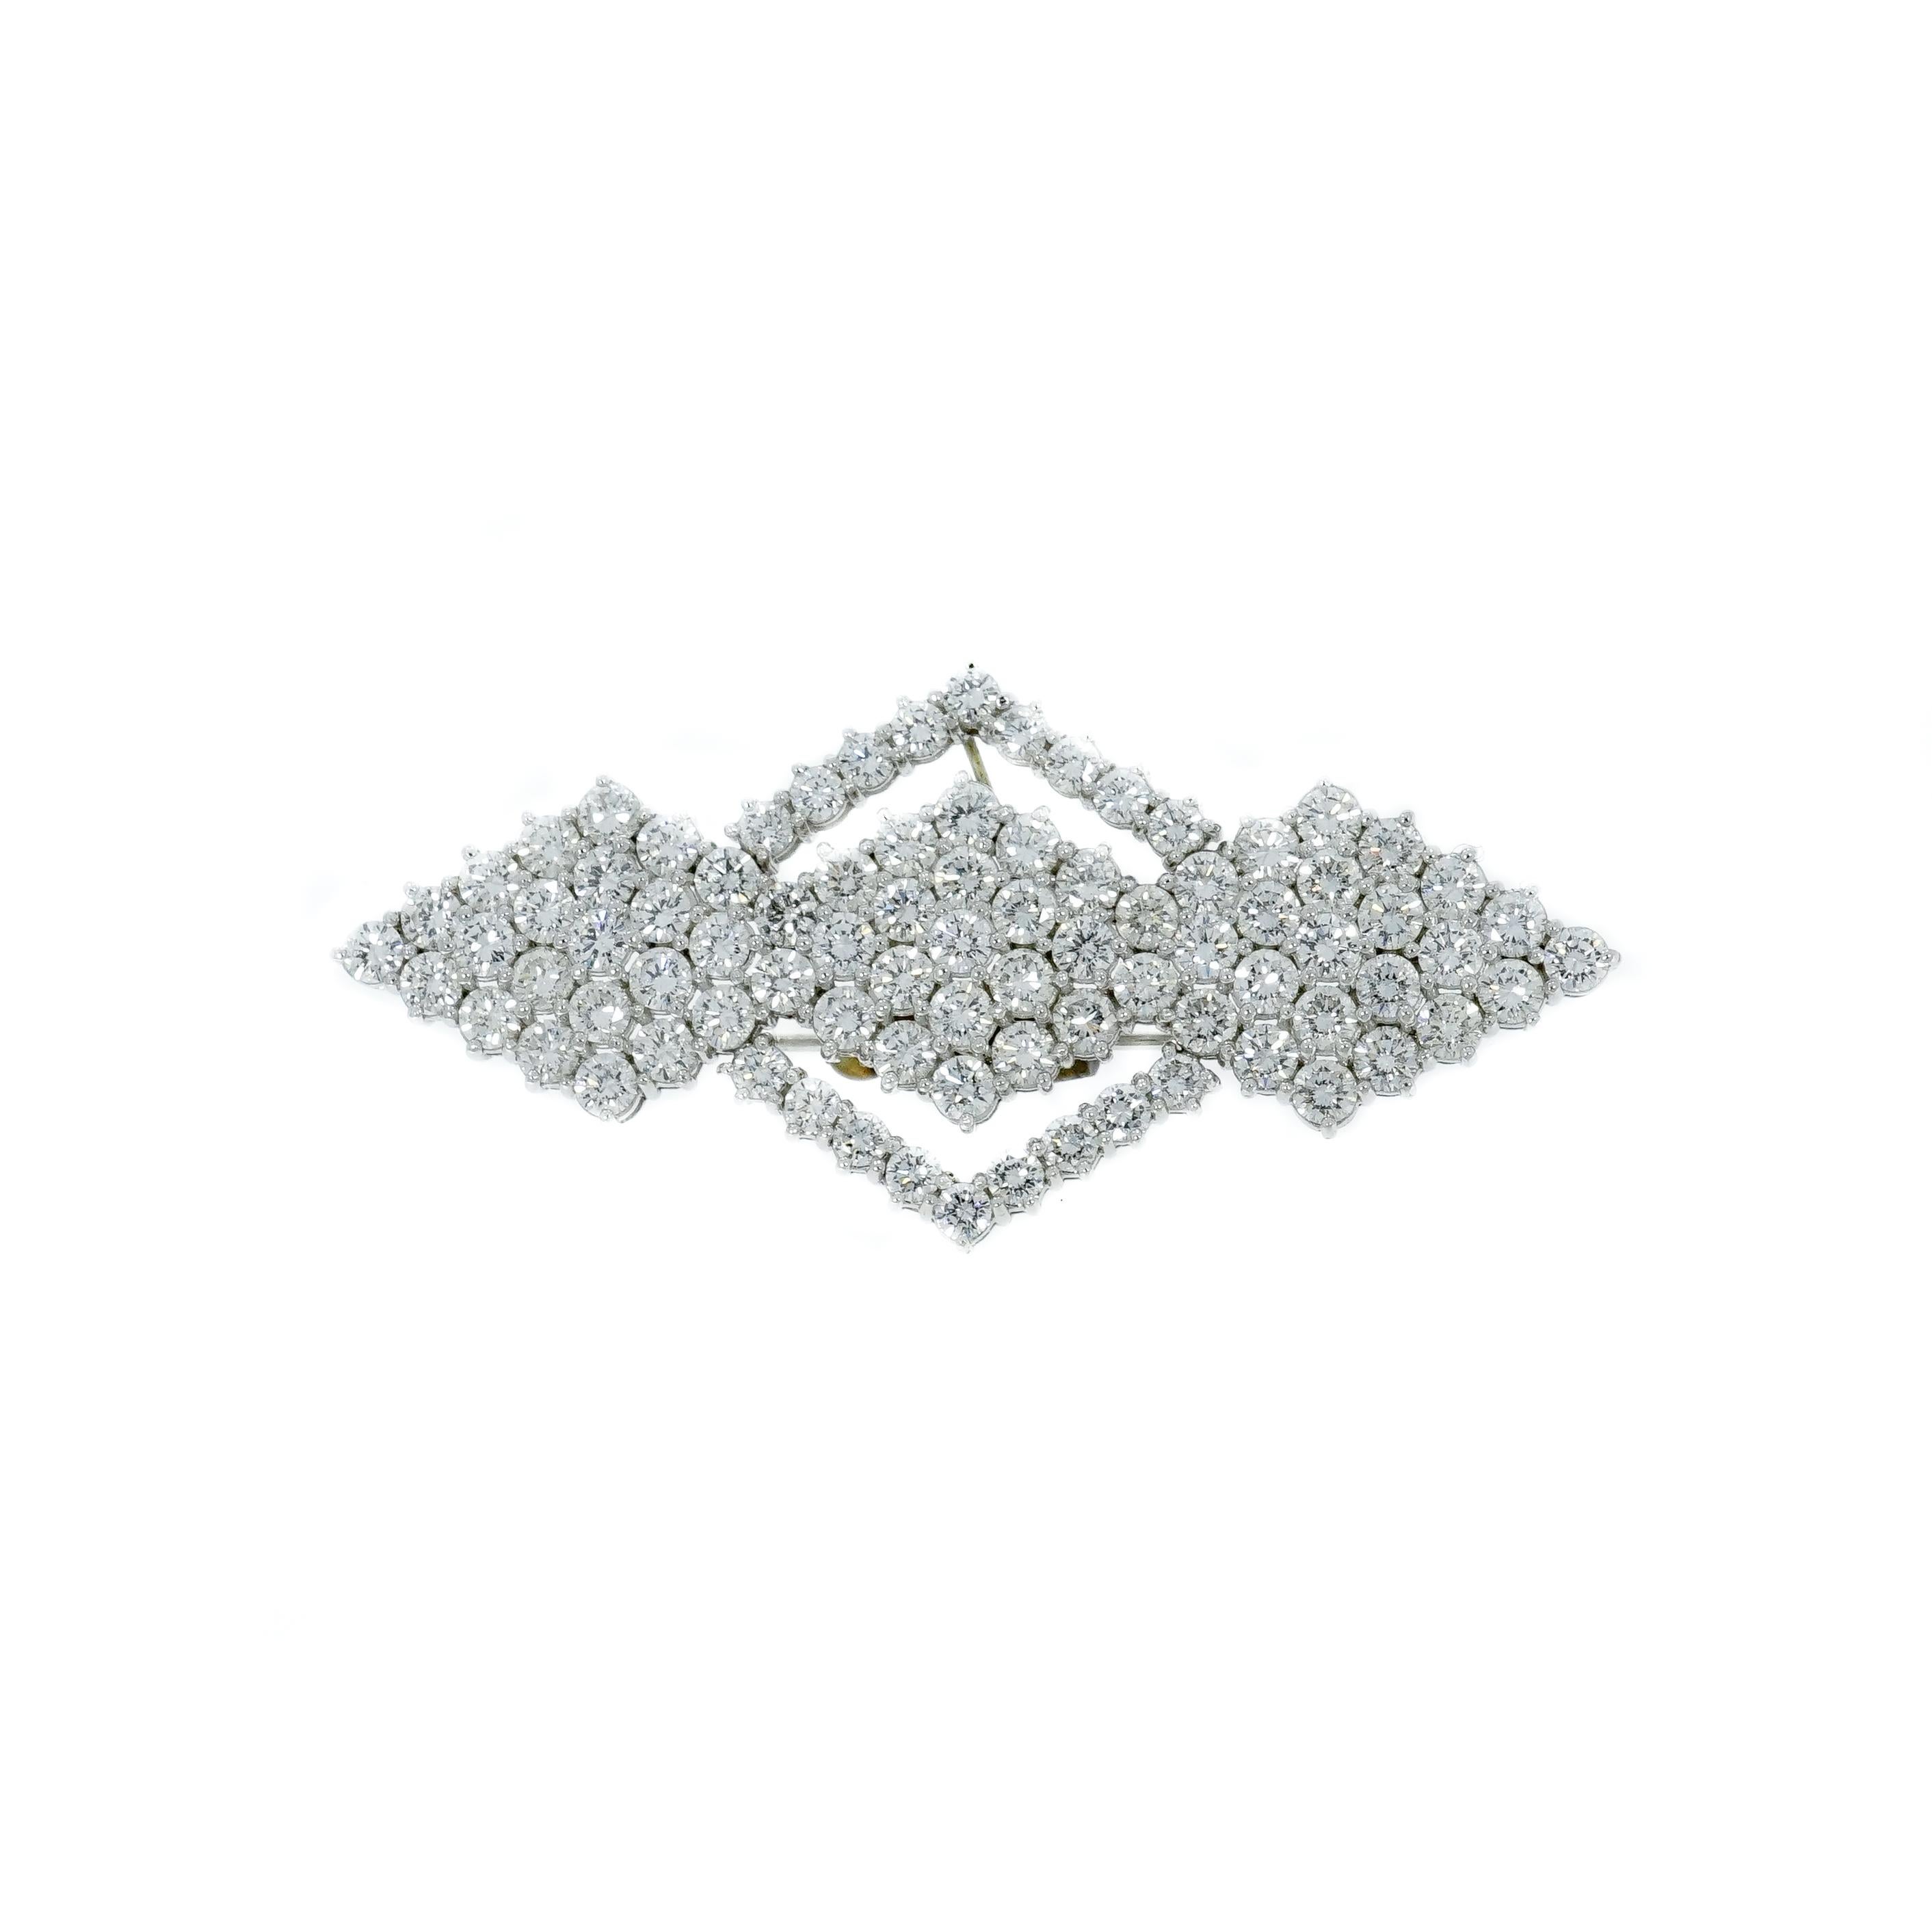 Comprised of approximately 80 Diamonds totaling around 10 carats total weight.
Set in Platinum and arranged in a geometrical shaped.
 